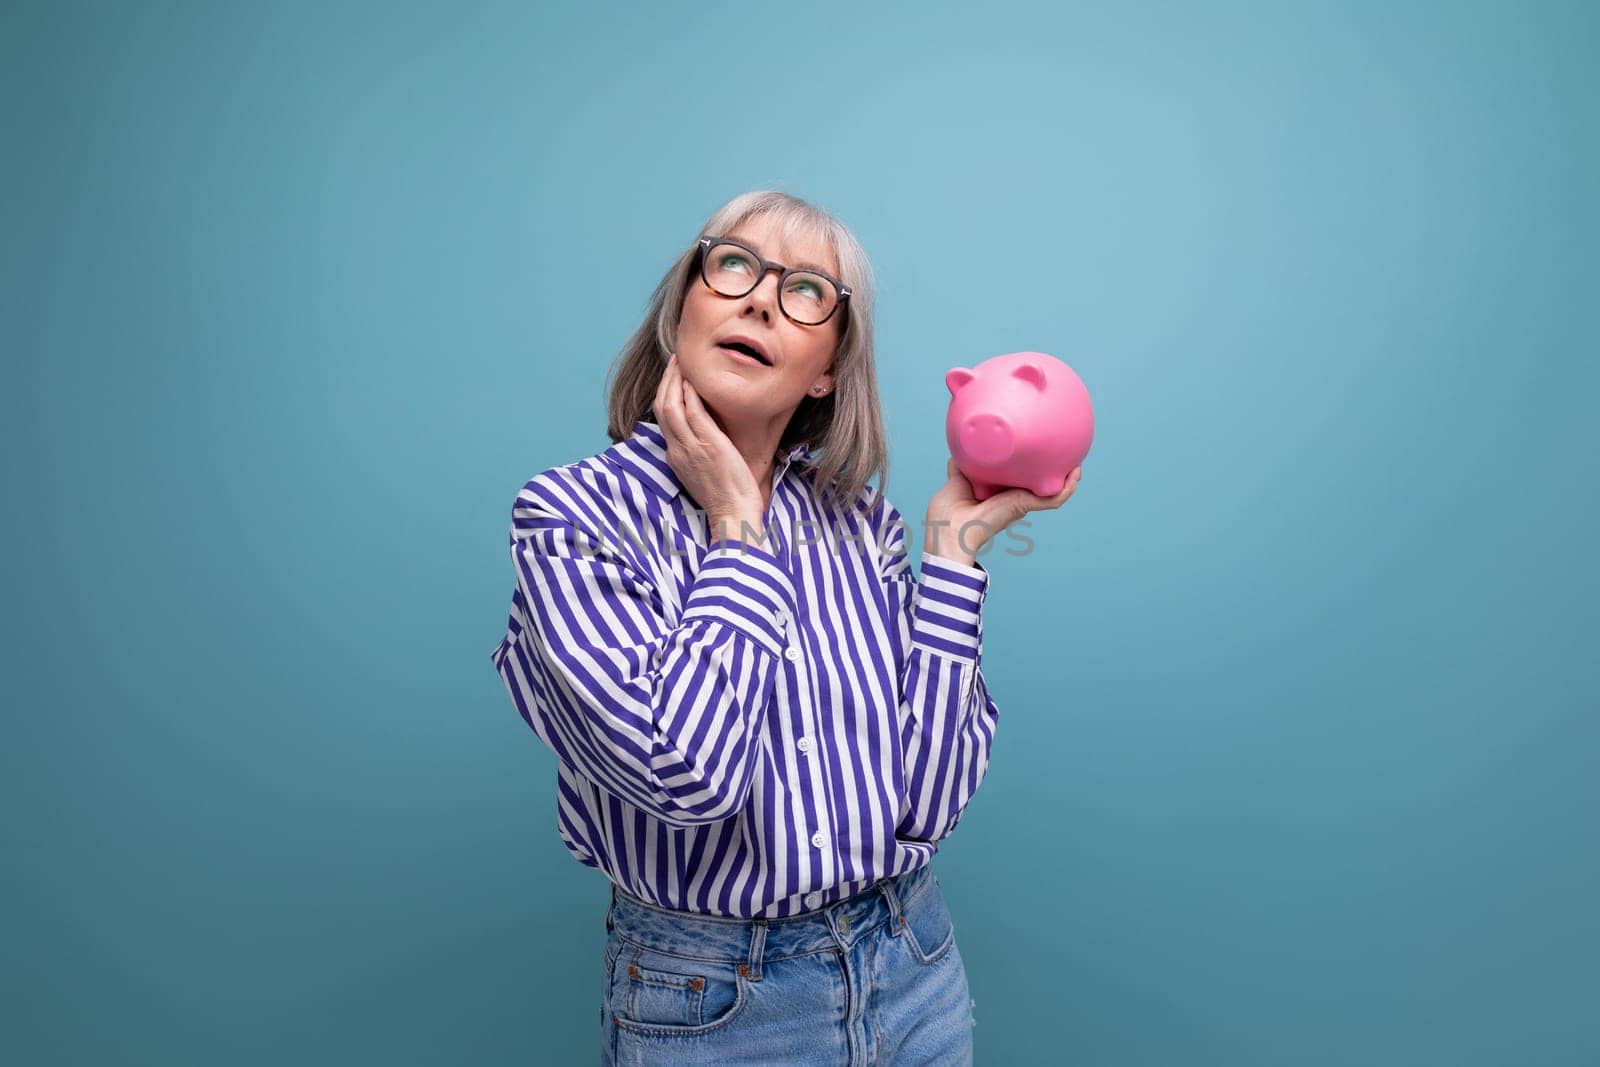 pensive 60s woman with gray hair holding piggy bank thinks about insurance on bright studio background by TRMK